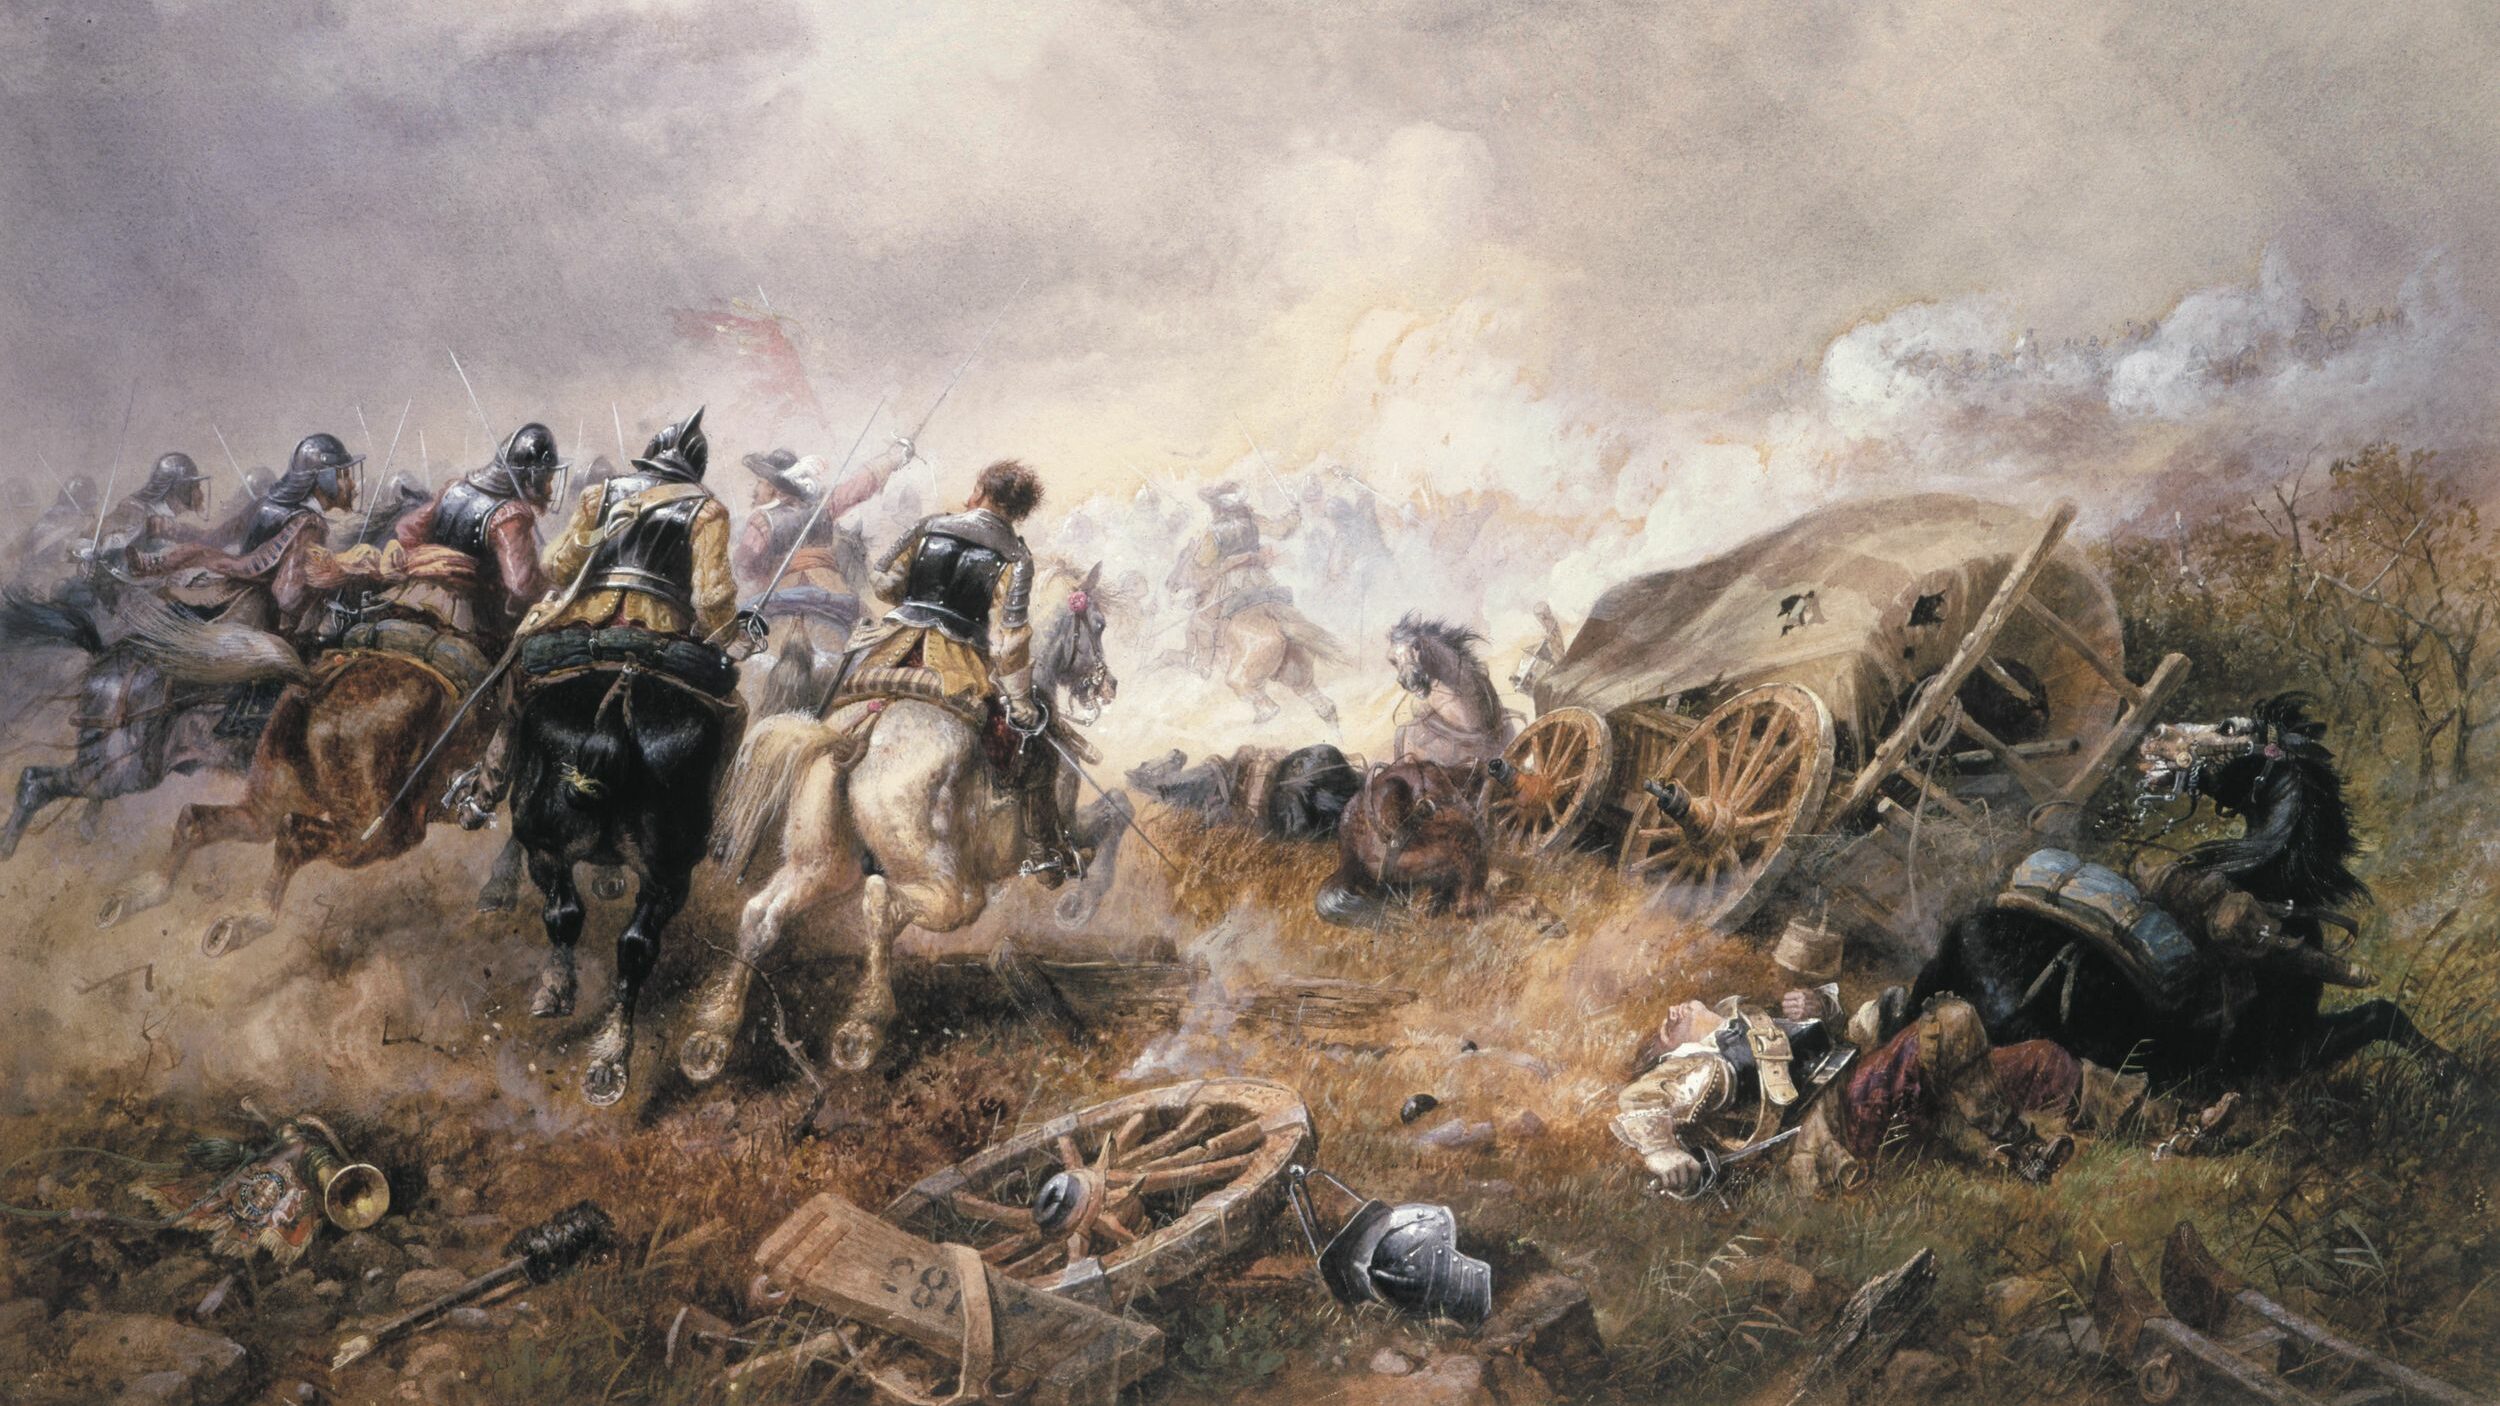 At the Battle of Edgehill, Cavalier horsemen broke off their attack to loot the Roundhead wagon train, fatally stalling their own momentum. Painting by Richard Beavis. The Art Archive/Private Collection